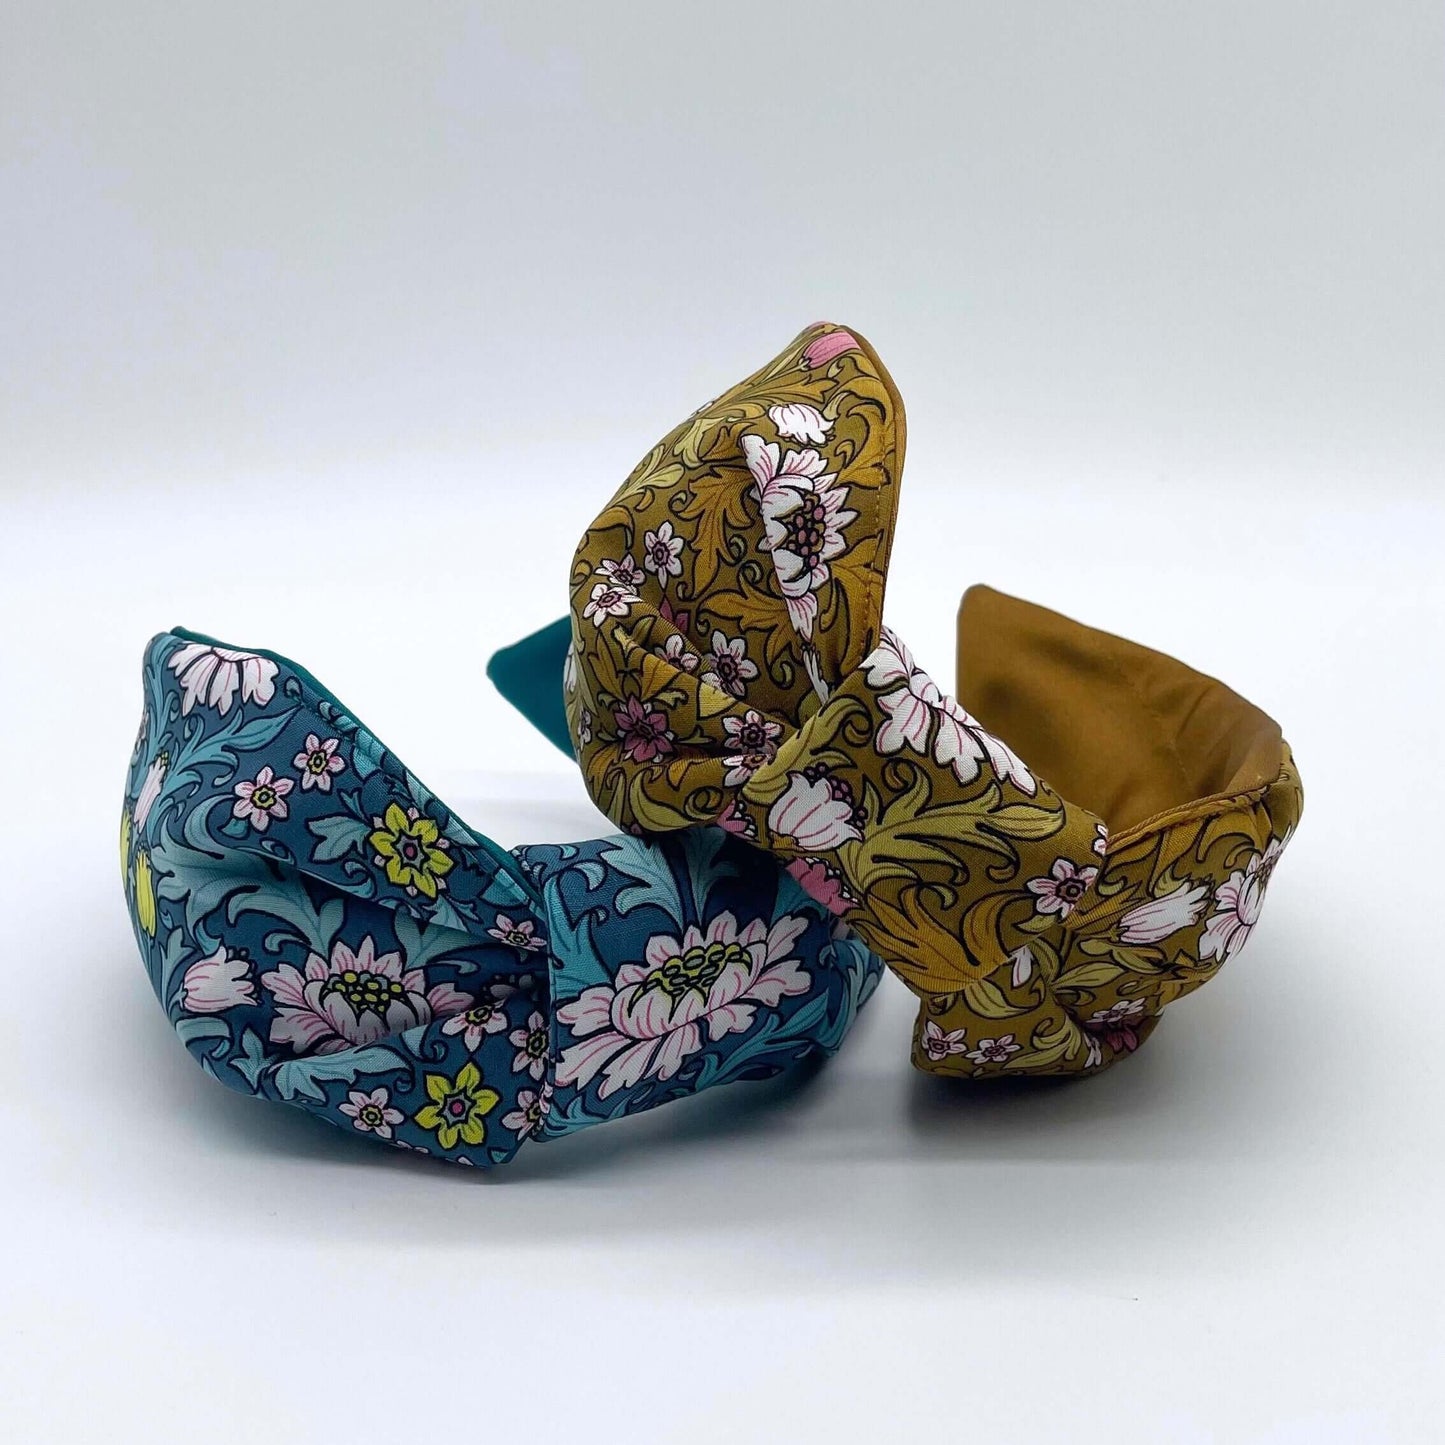 Two William Morris- Inspired Knot Headbands with satin lining in blue and mustard. Flowers and leaves print